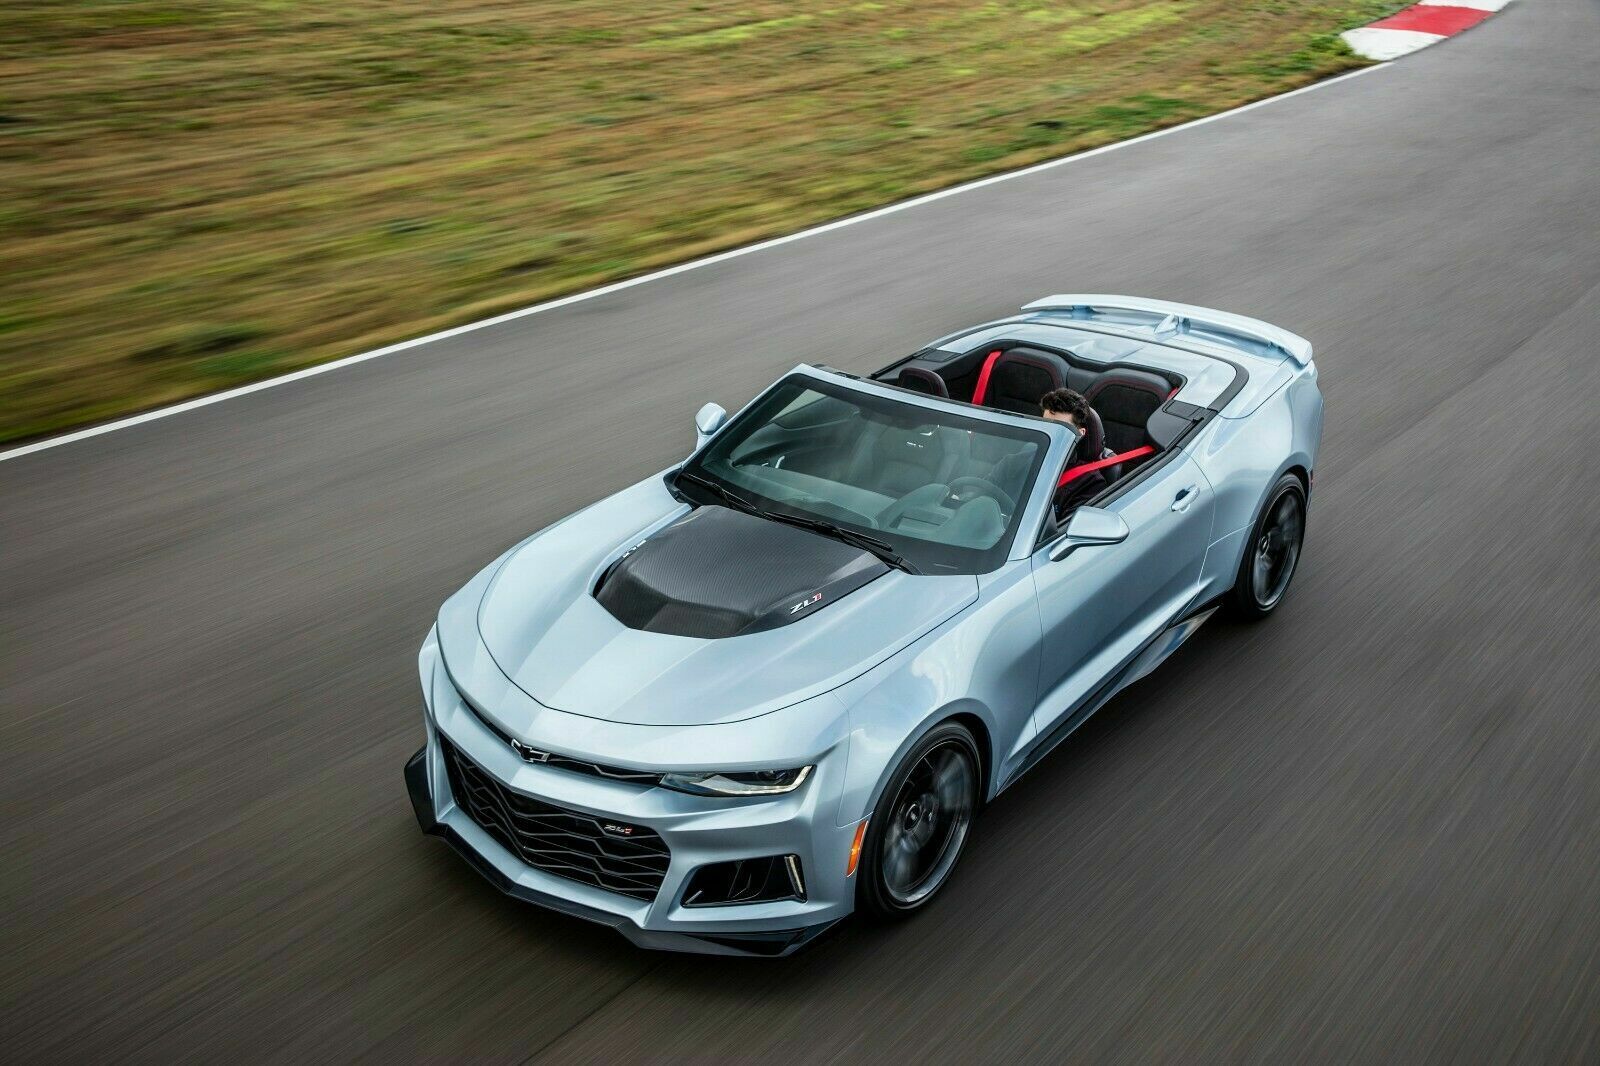 2018 Chevrolet Camaro Convertible ZL1 Top View POSTER 24 X 36 INCH SWEET